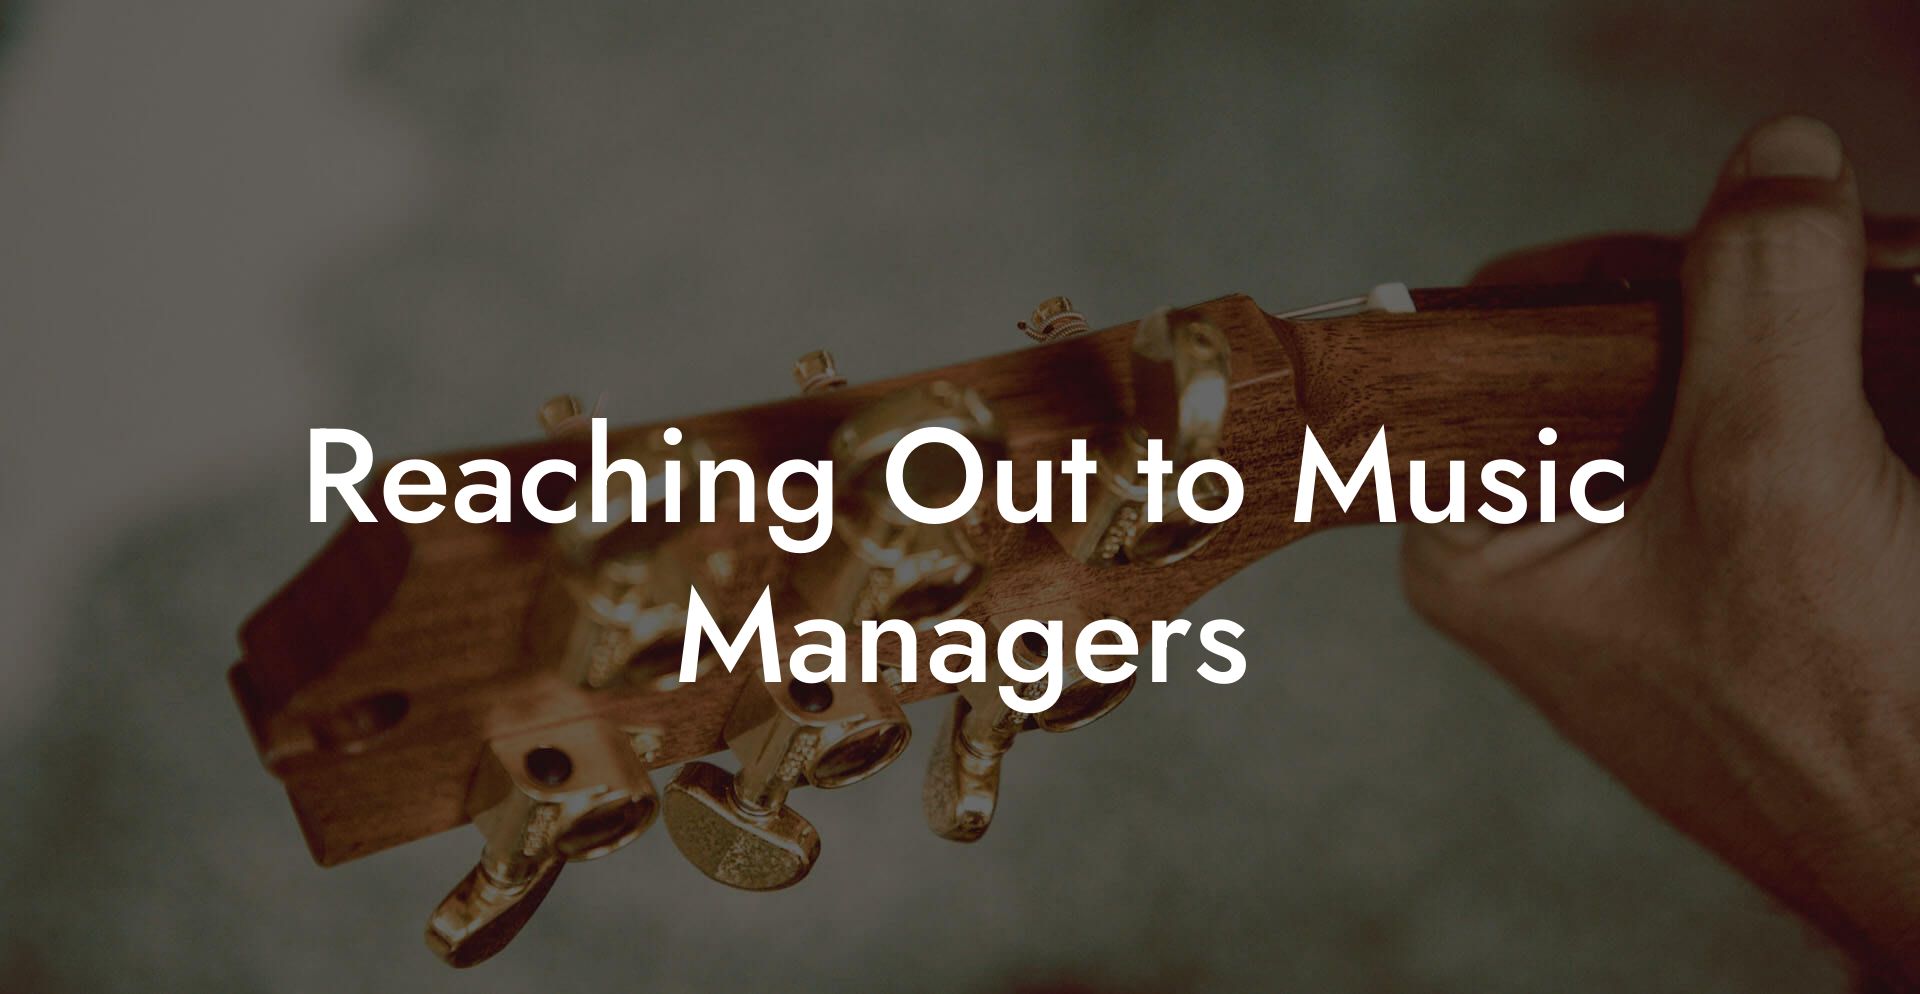 Reaching Out to Music Managers